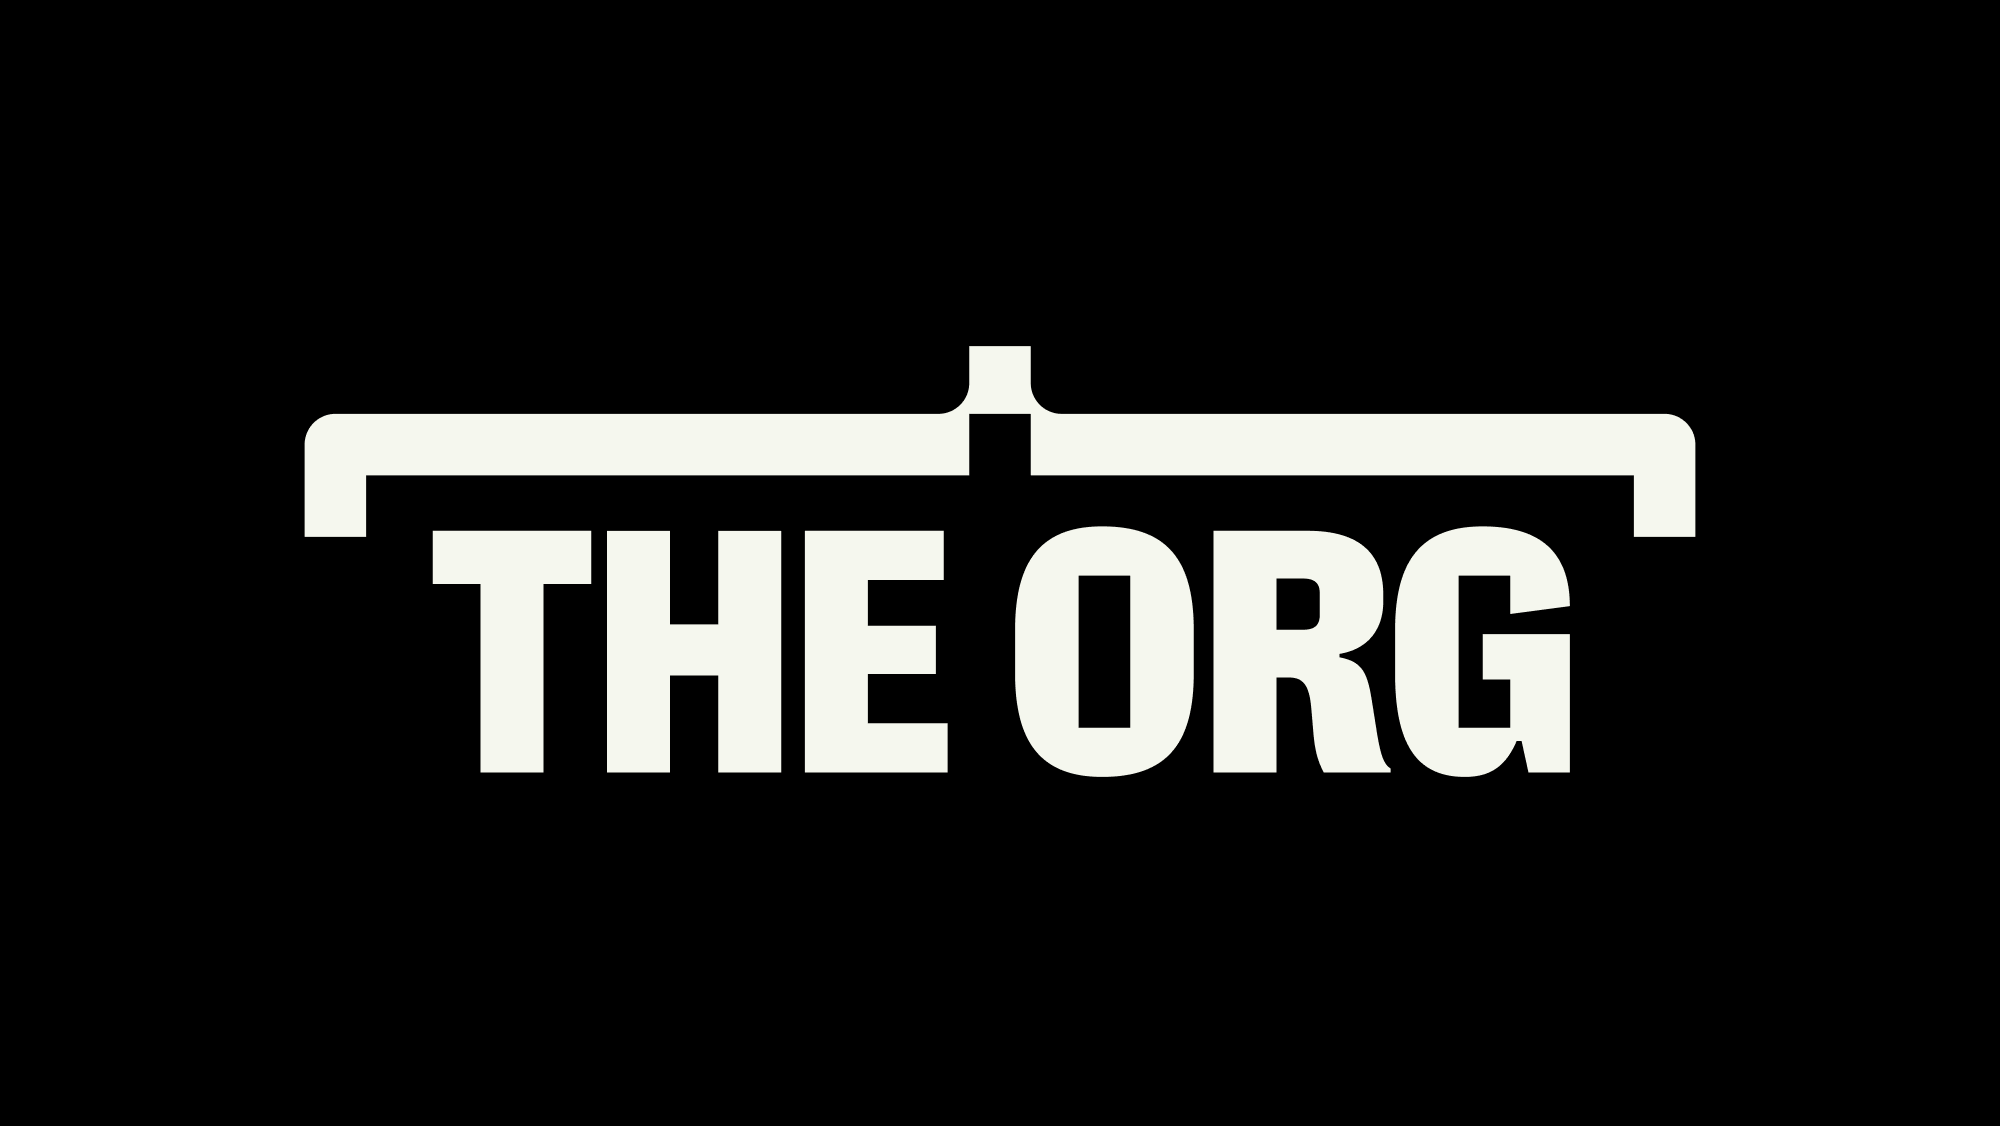 The Org